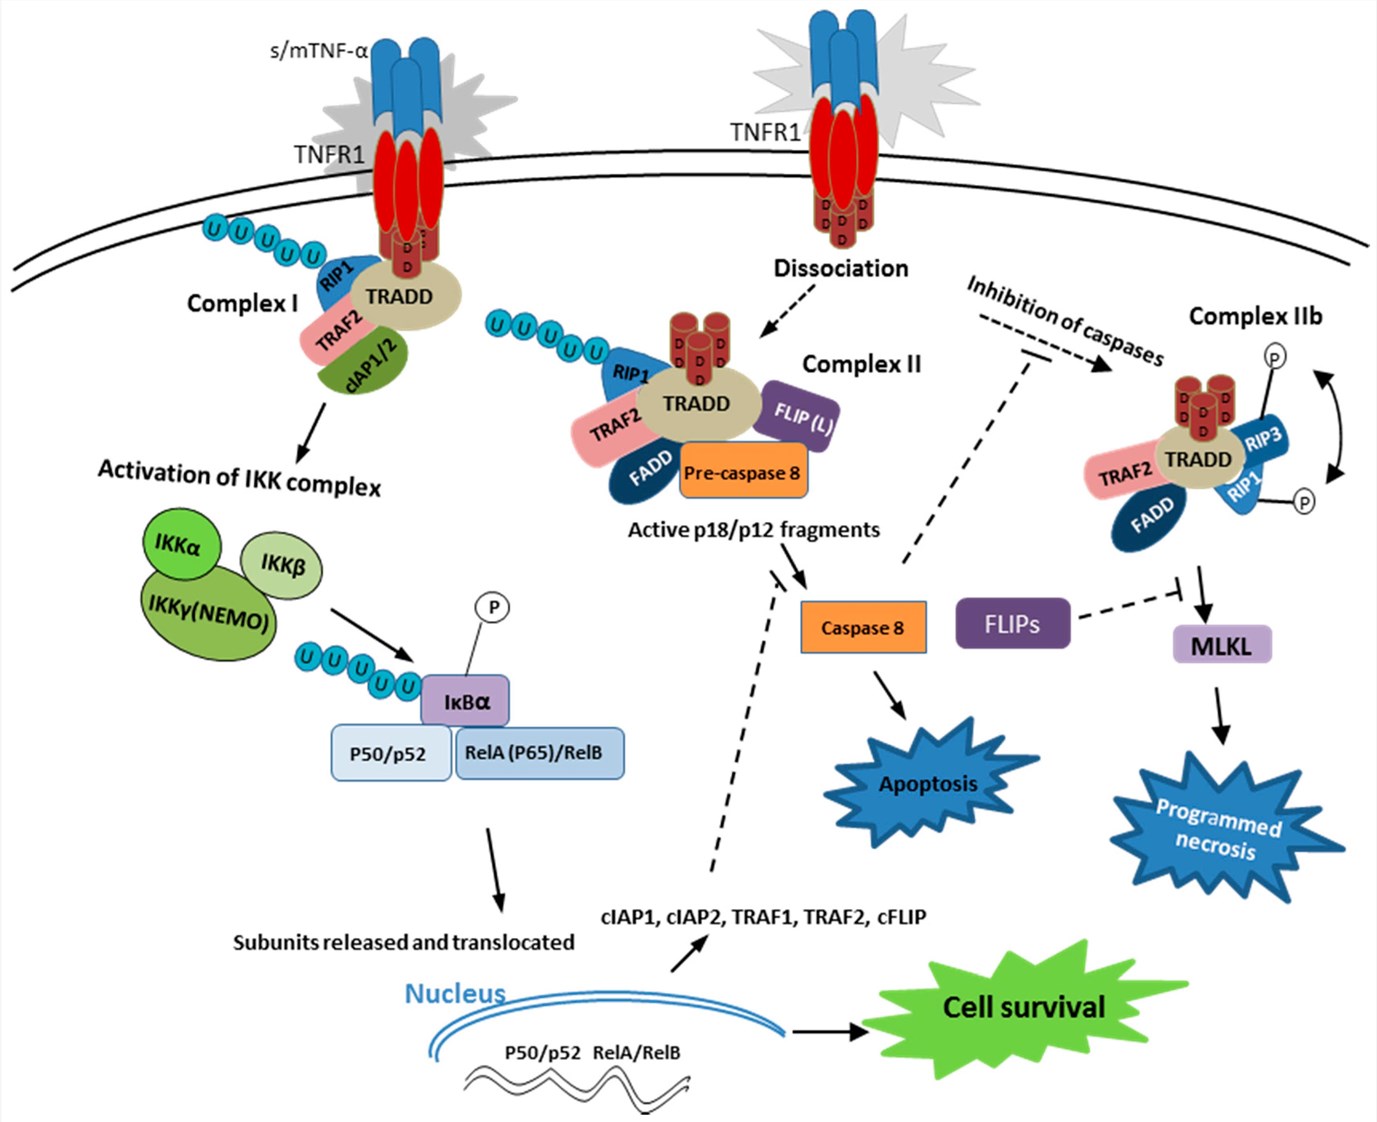 The trimeric TNF-α engagement of TNFR1 leads to cellular apoptosis or cell survival via the distinct complex signaling pathways. 